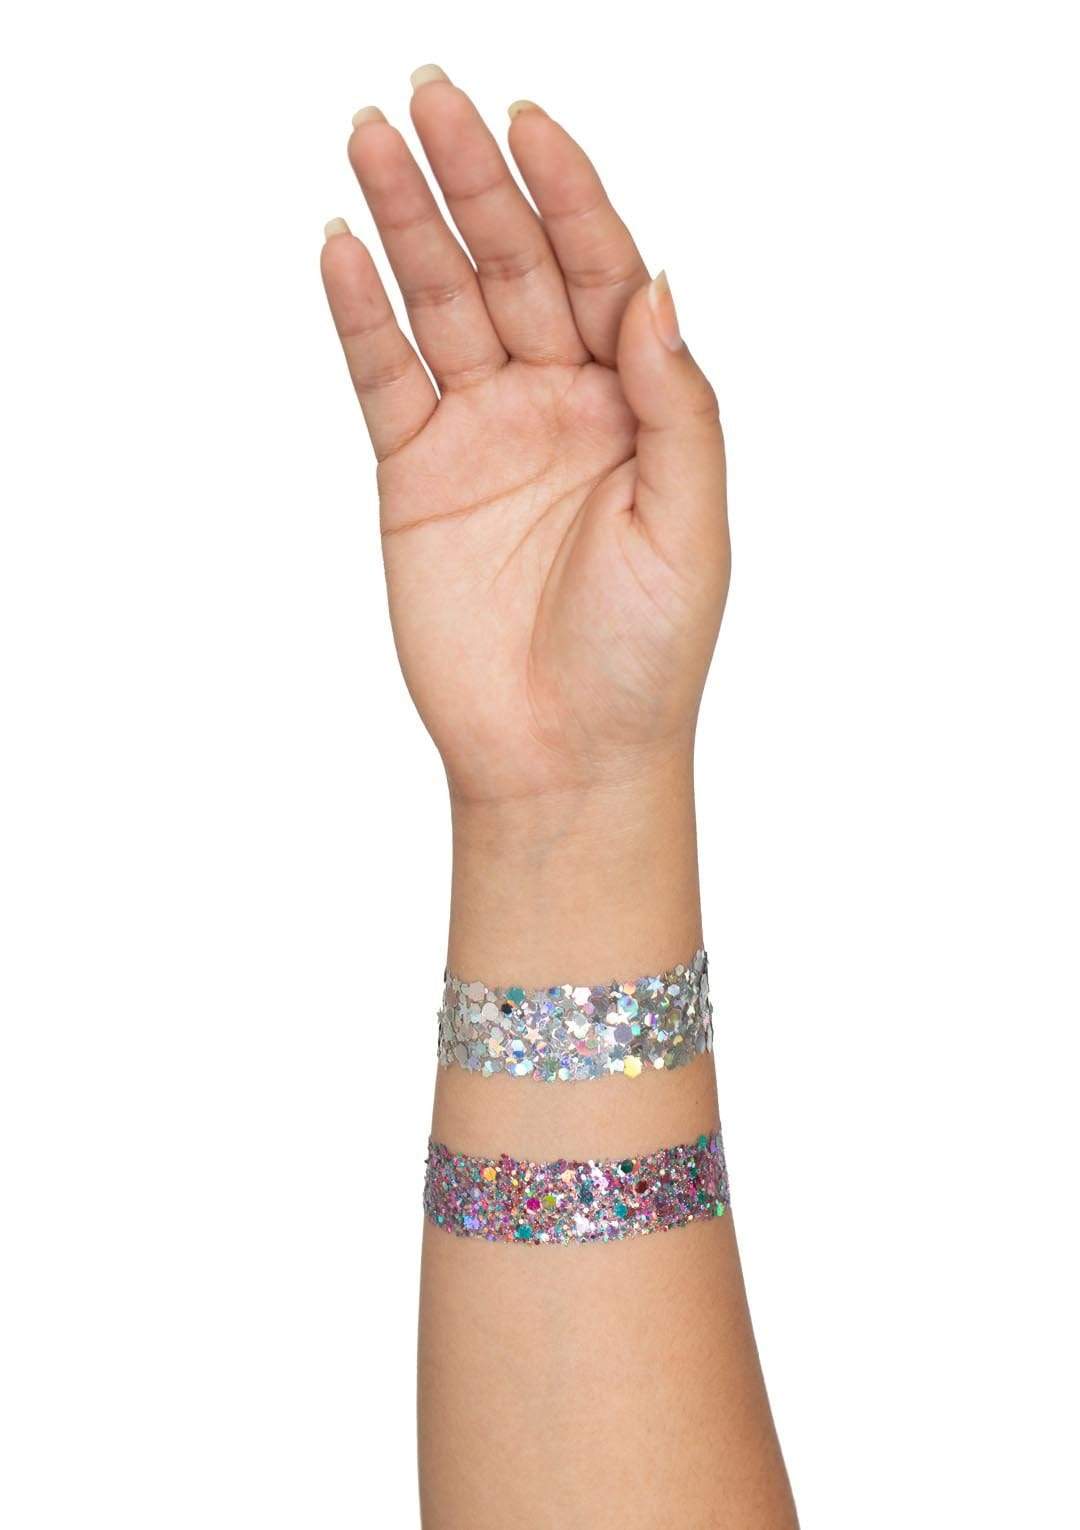 Vibe Neon Face Jewels include glitter that you can adhere to skin and other surfaces with spray (sold seperately)